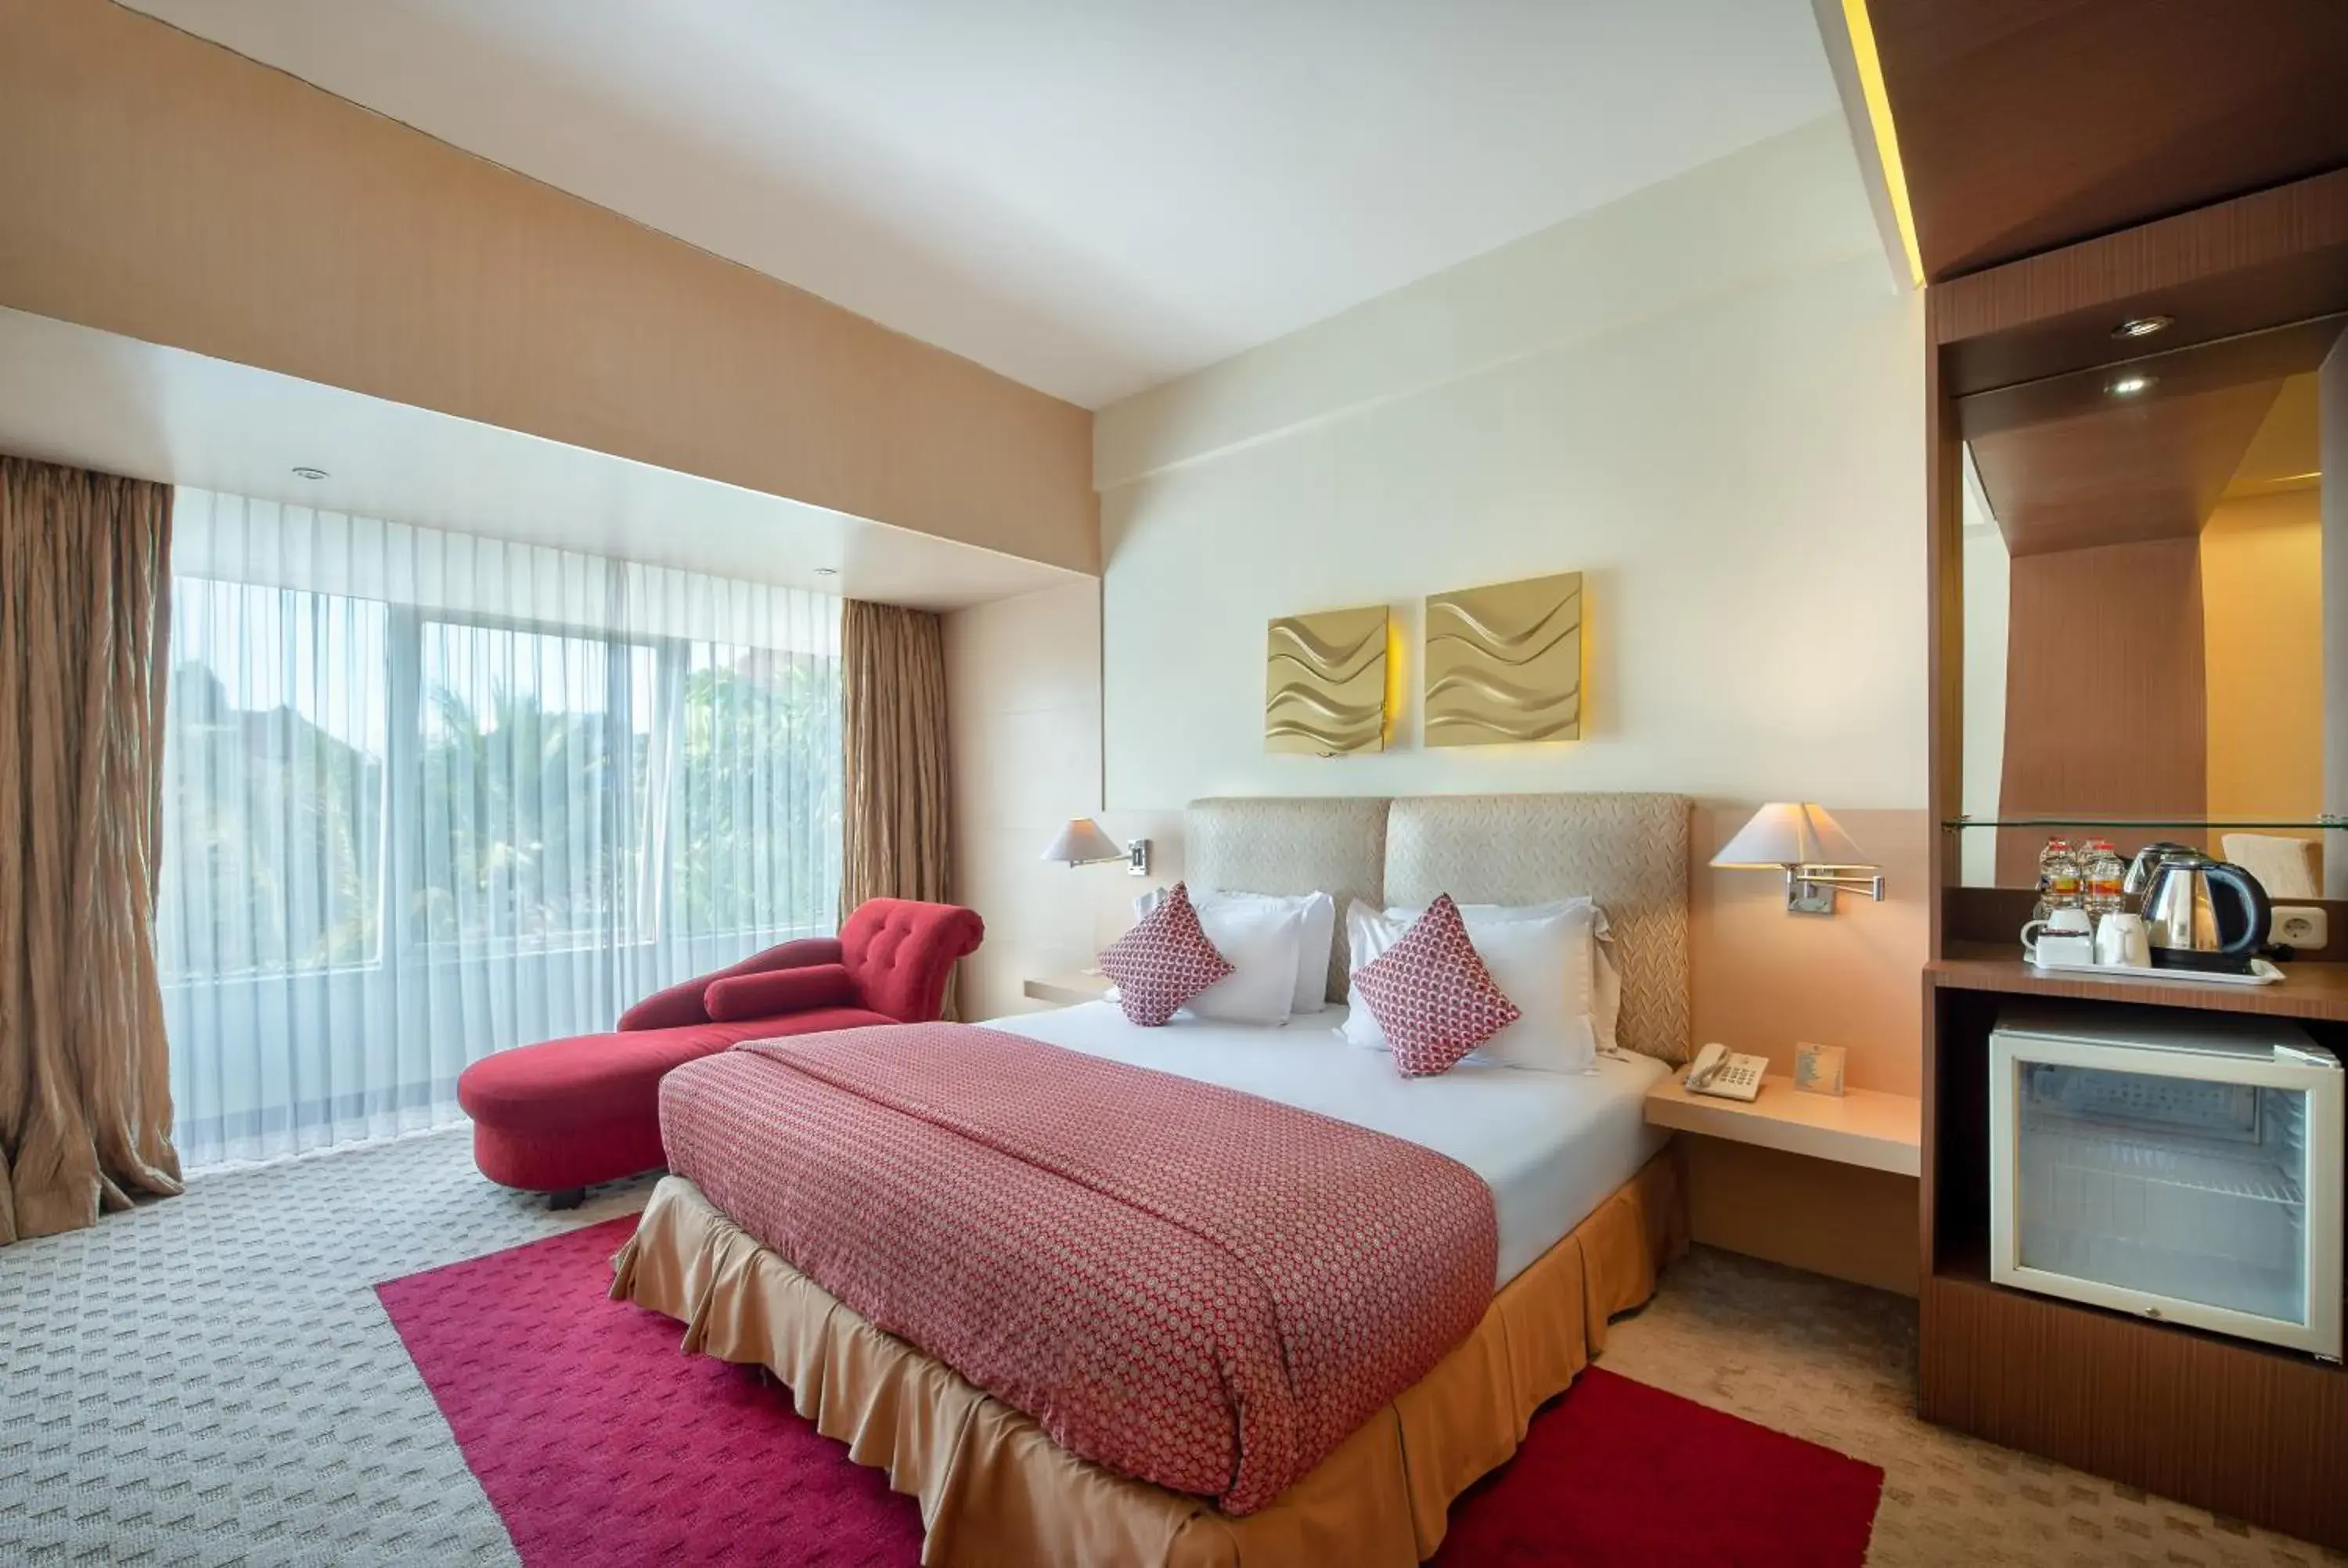 Bedroom, Bed in Lux Tychi Hotel Malang